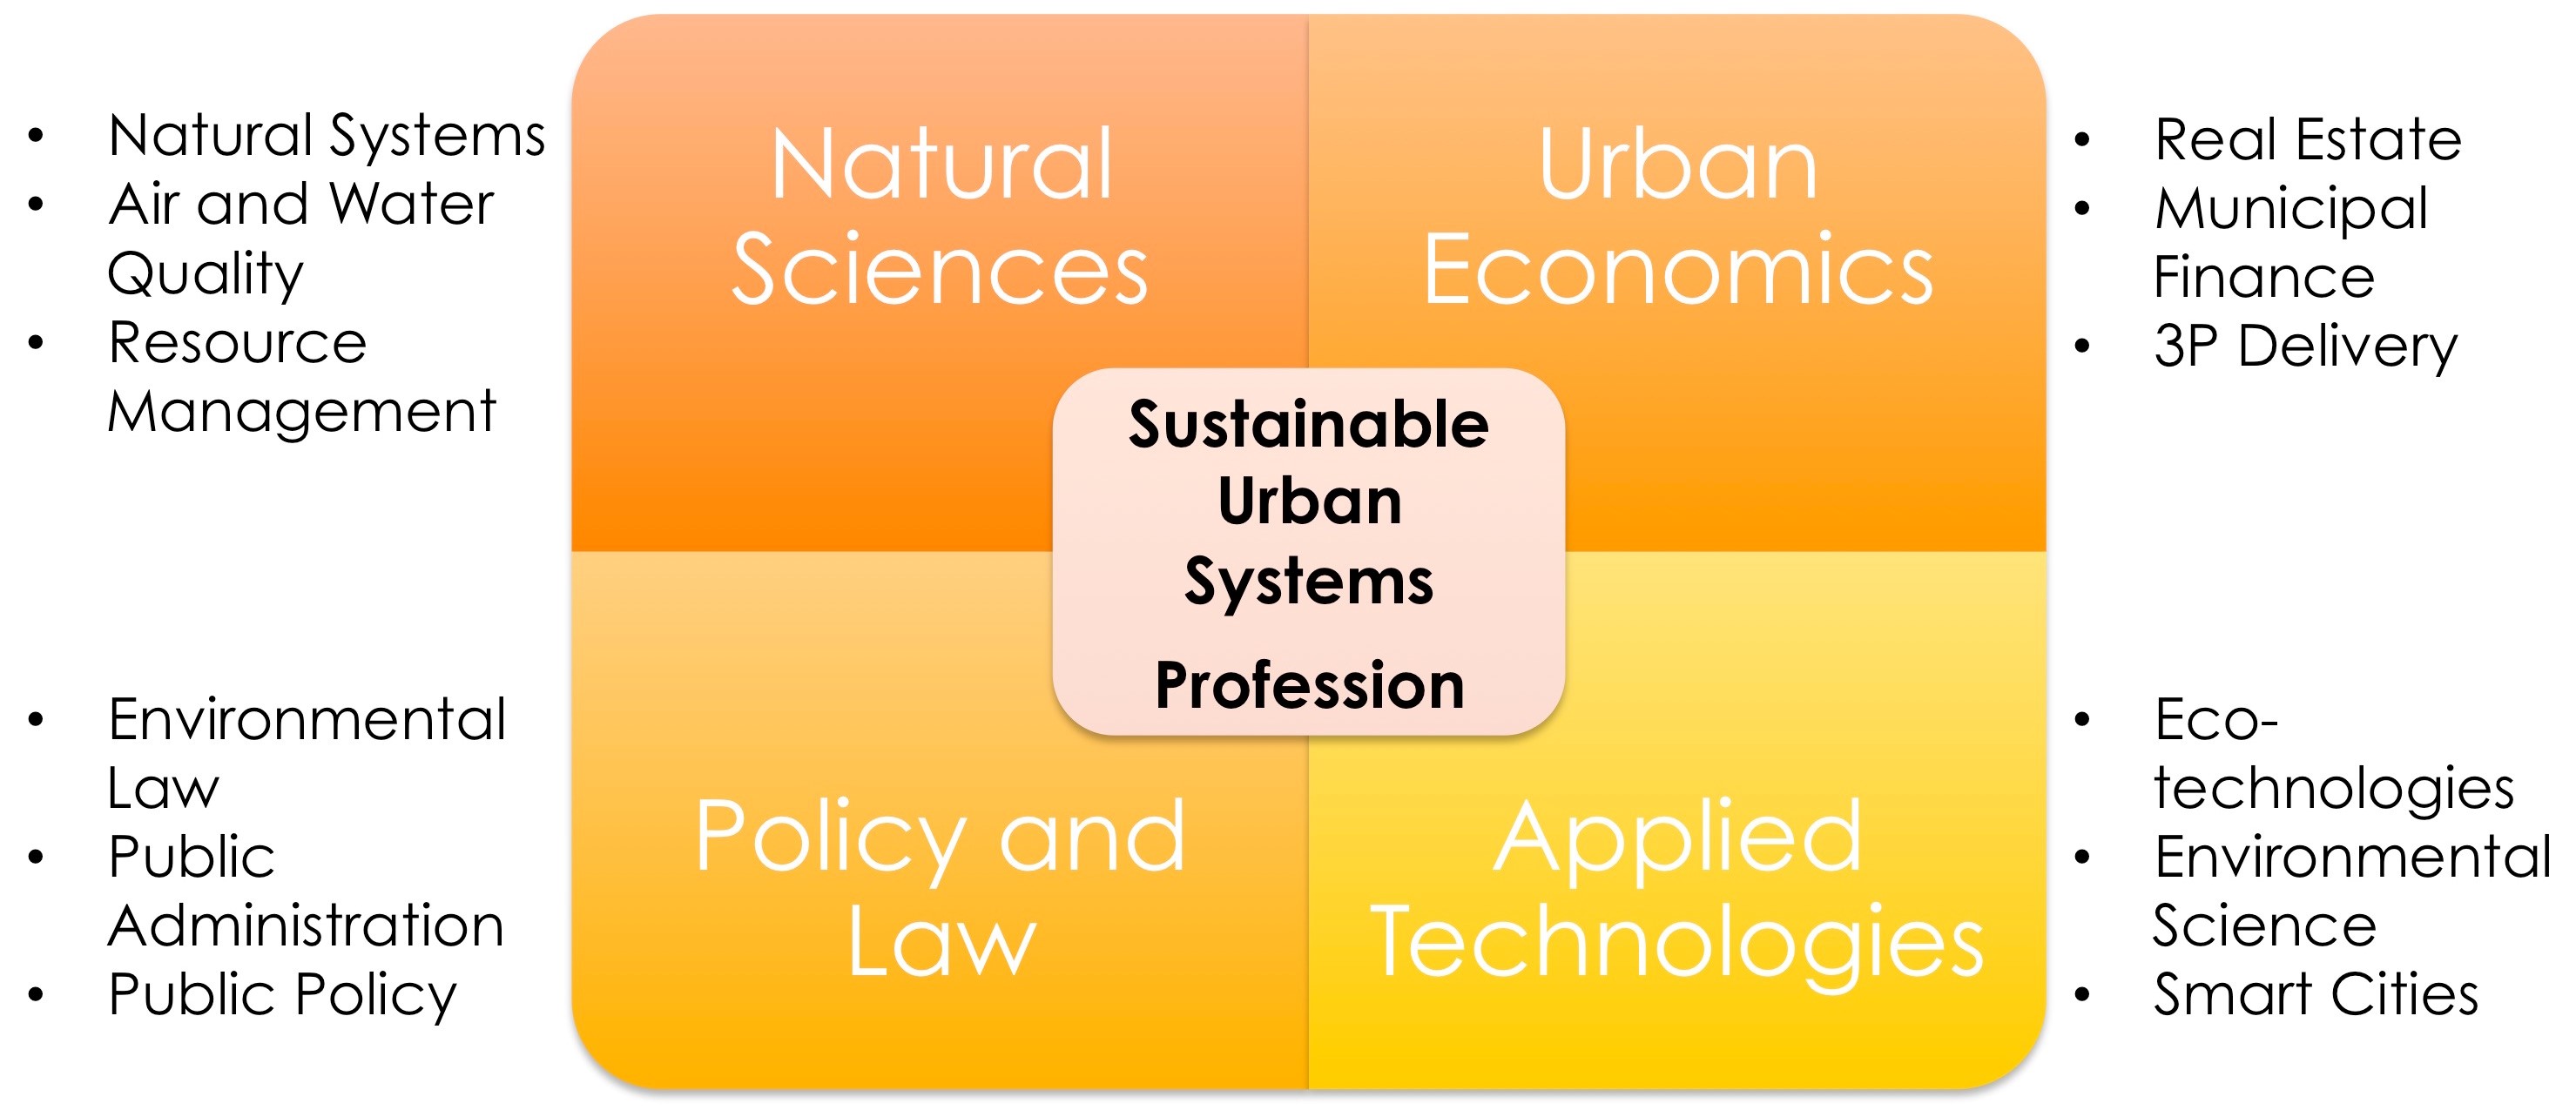 Sustainable Urban Systems Professions